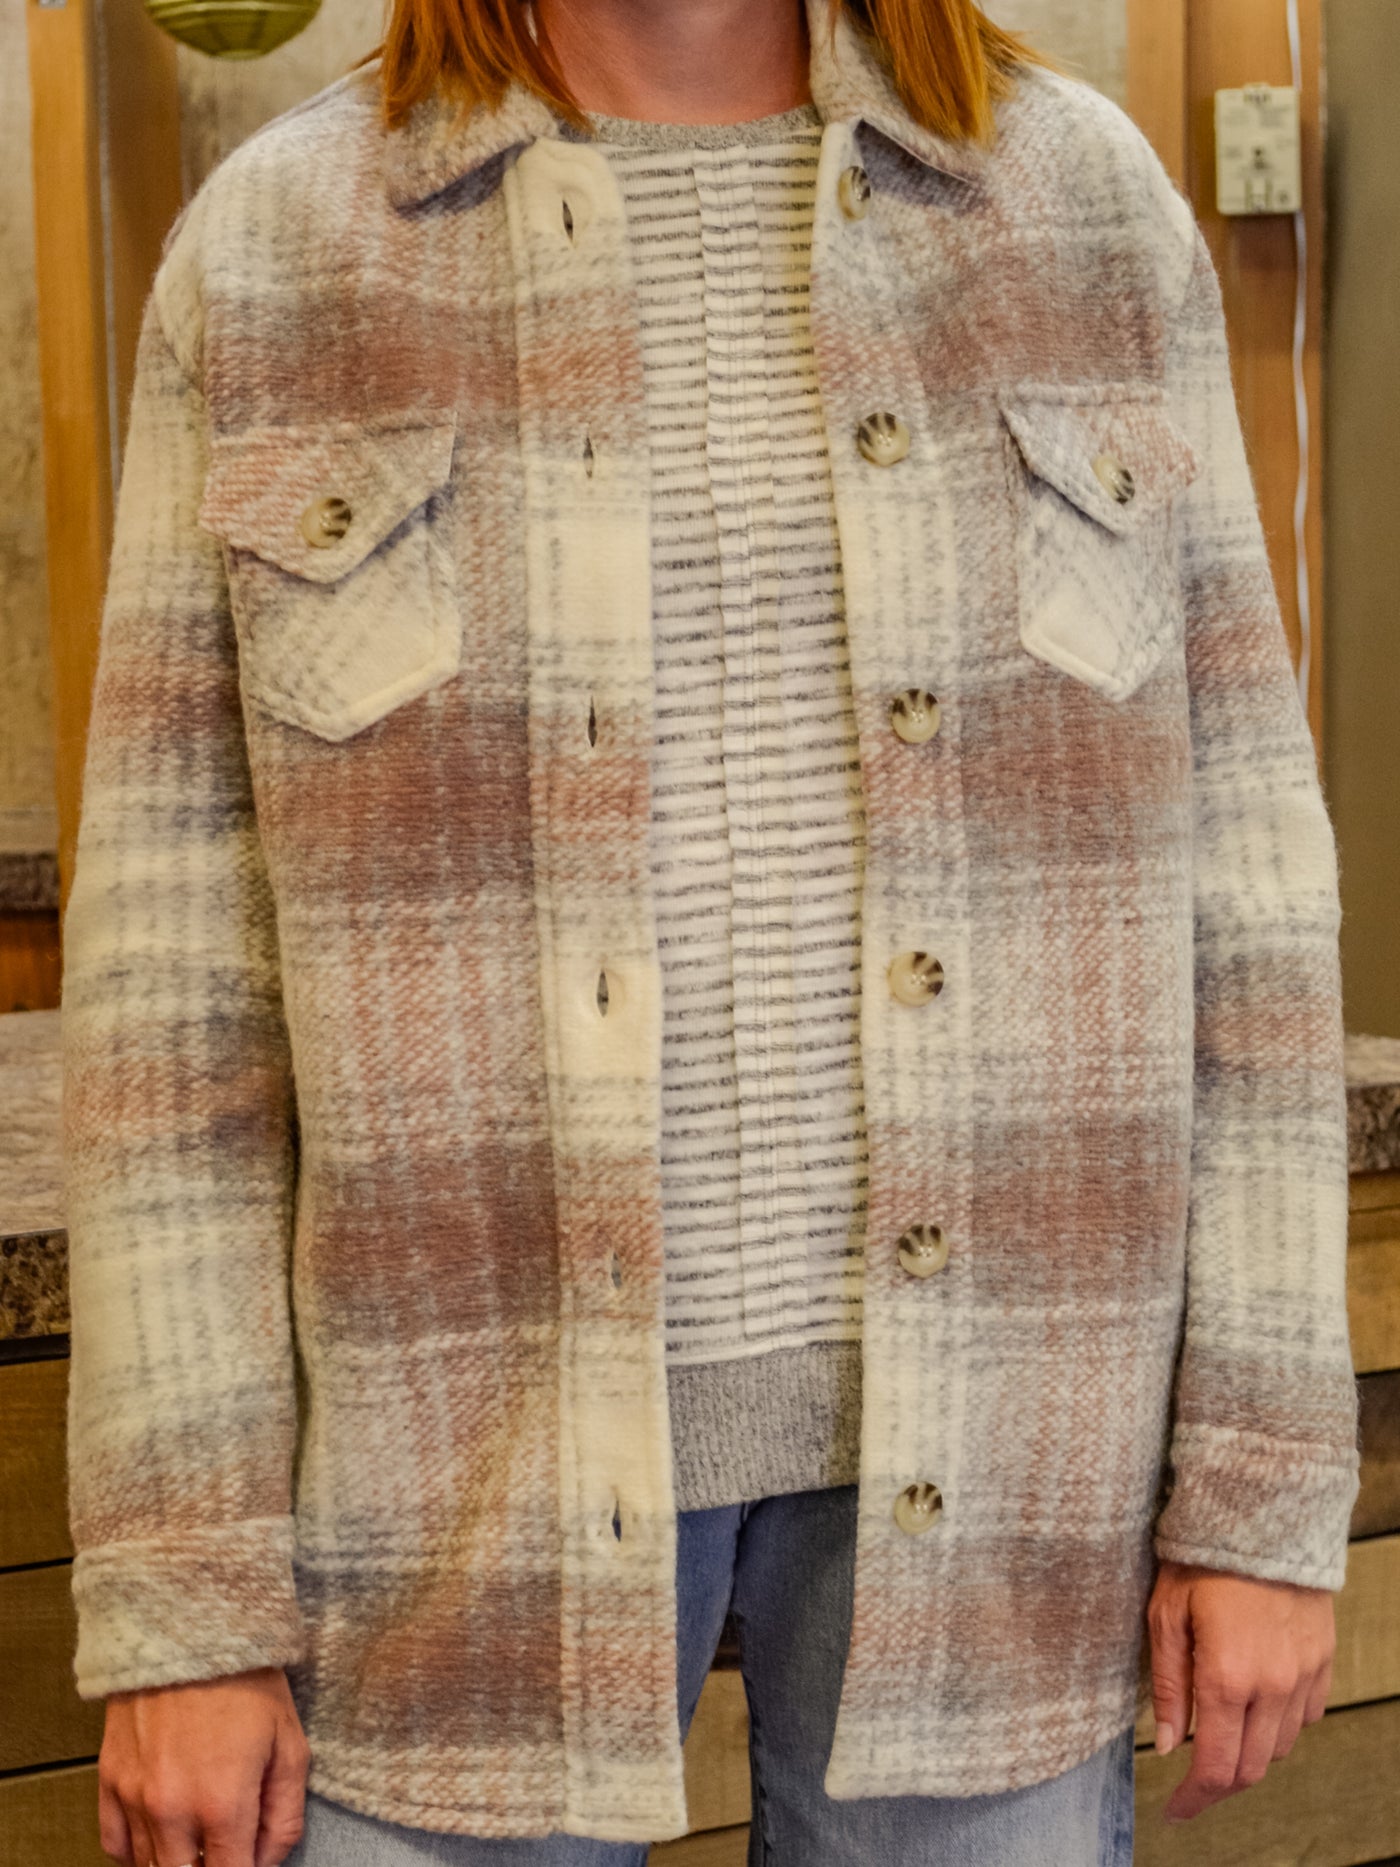 A model wearing a plaid shacket over a grey and white sweater with jeans.